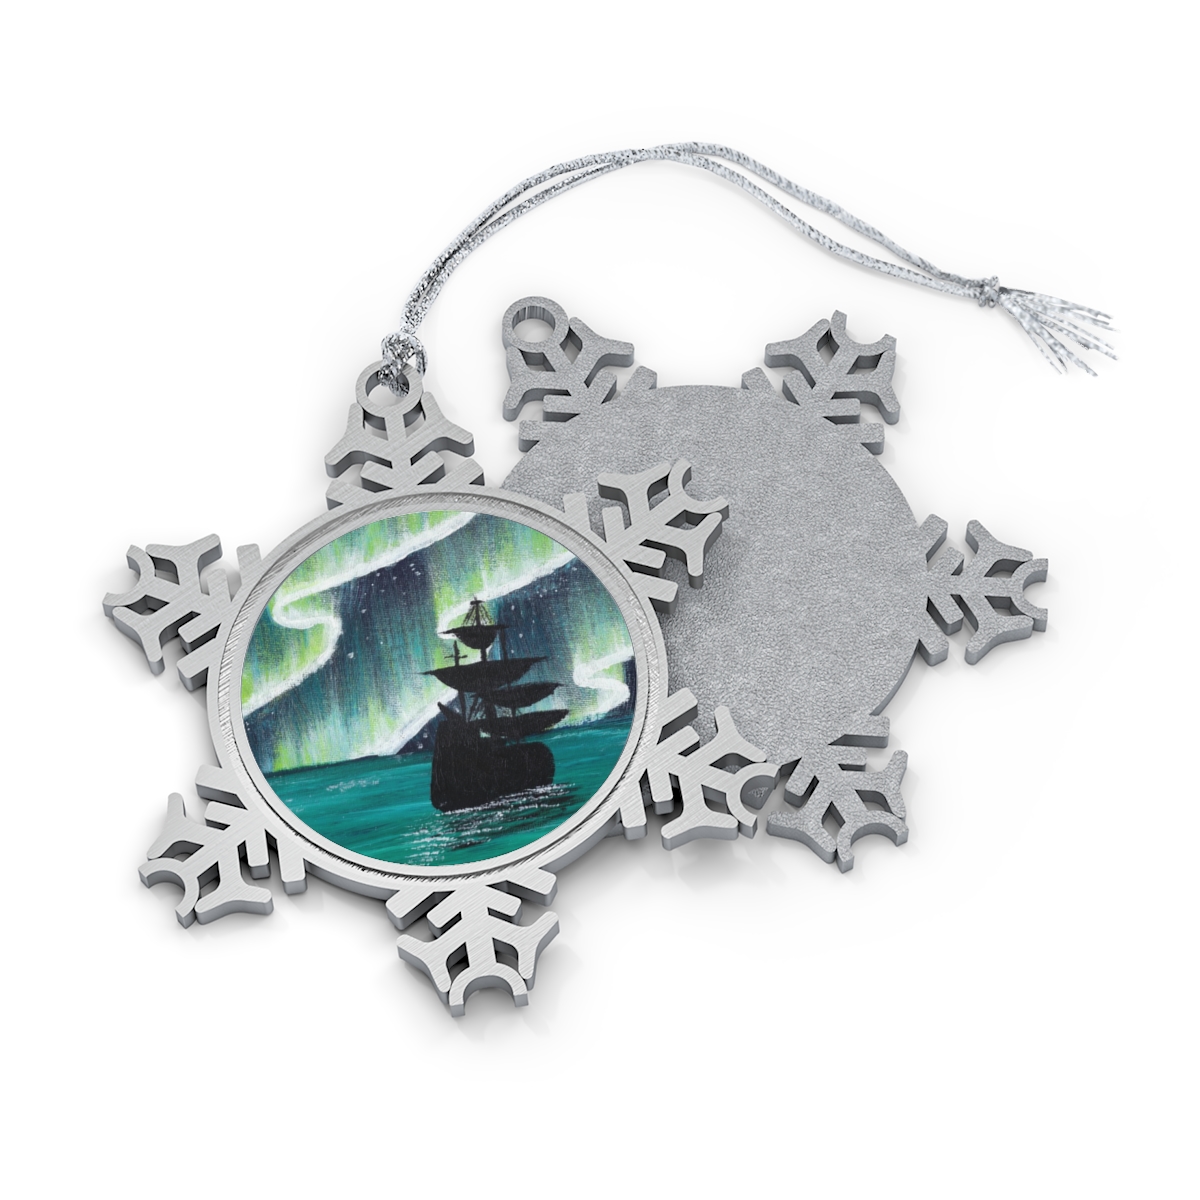 Pewter Snowflake Ornament - The Witch of November